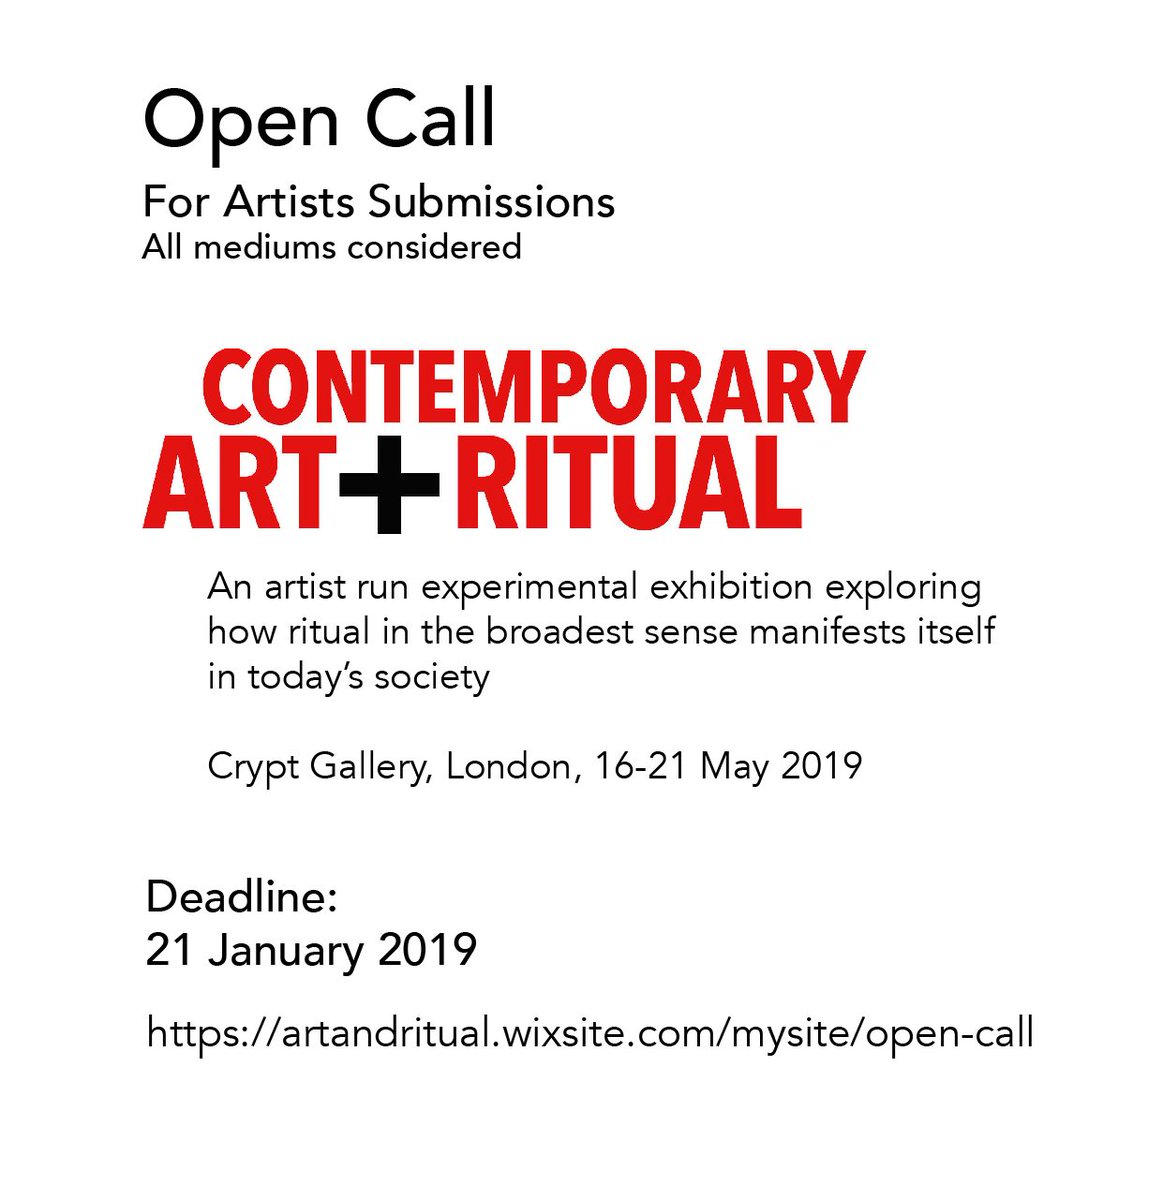 #opencall to all #artists to propose work on theme of #ritual Details + how to submit artandritual.wixsite.com/mysite/open-ca… #exhibition @TheCryptGallery #London in May. Deadline 21 January. Please repost/share